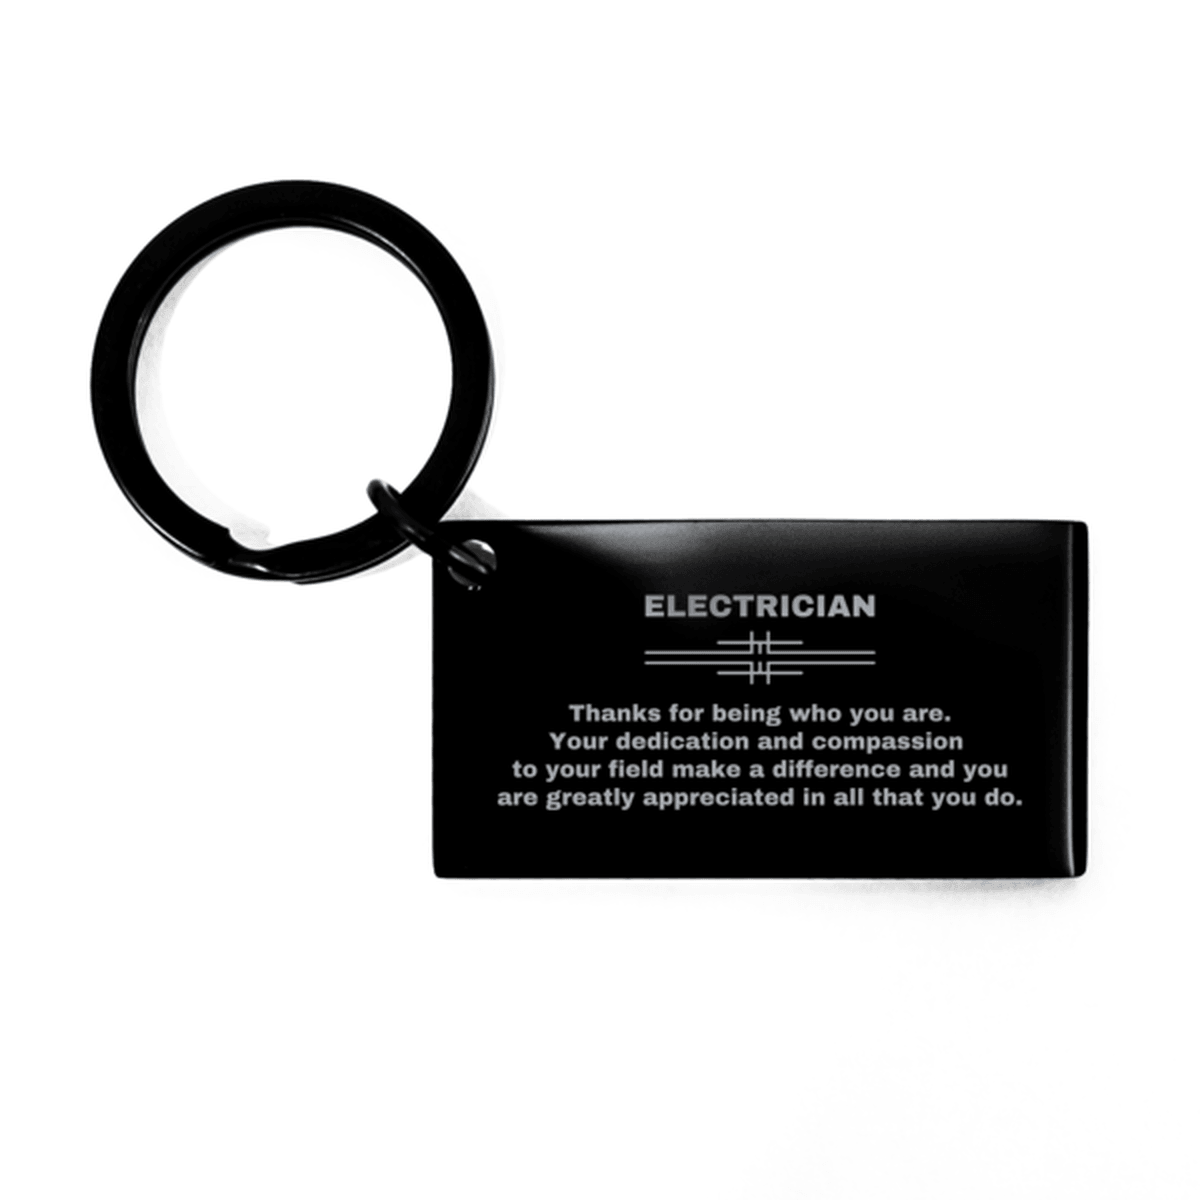 Electrician Black Engraved Keychain - Thanks for being who you are - Birthday Christmas Jewelry Gifts Coworkers Colleague Boss - Mallard Moon Gift Shop